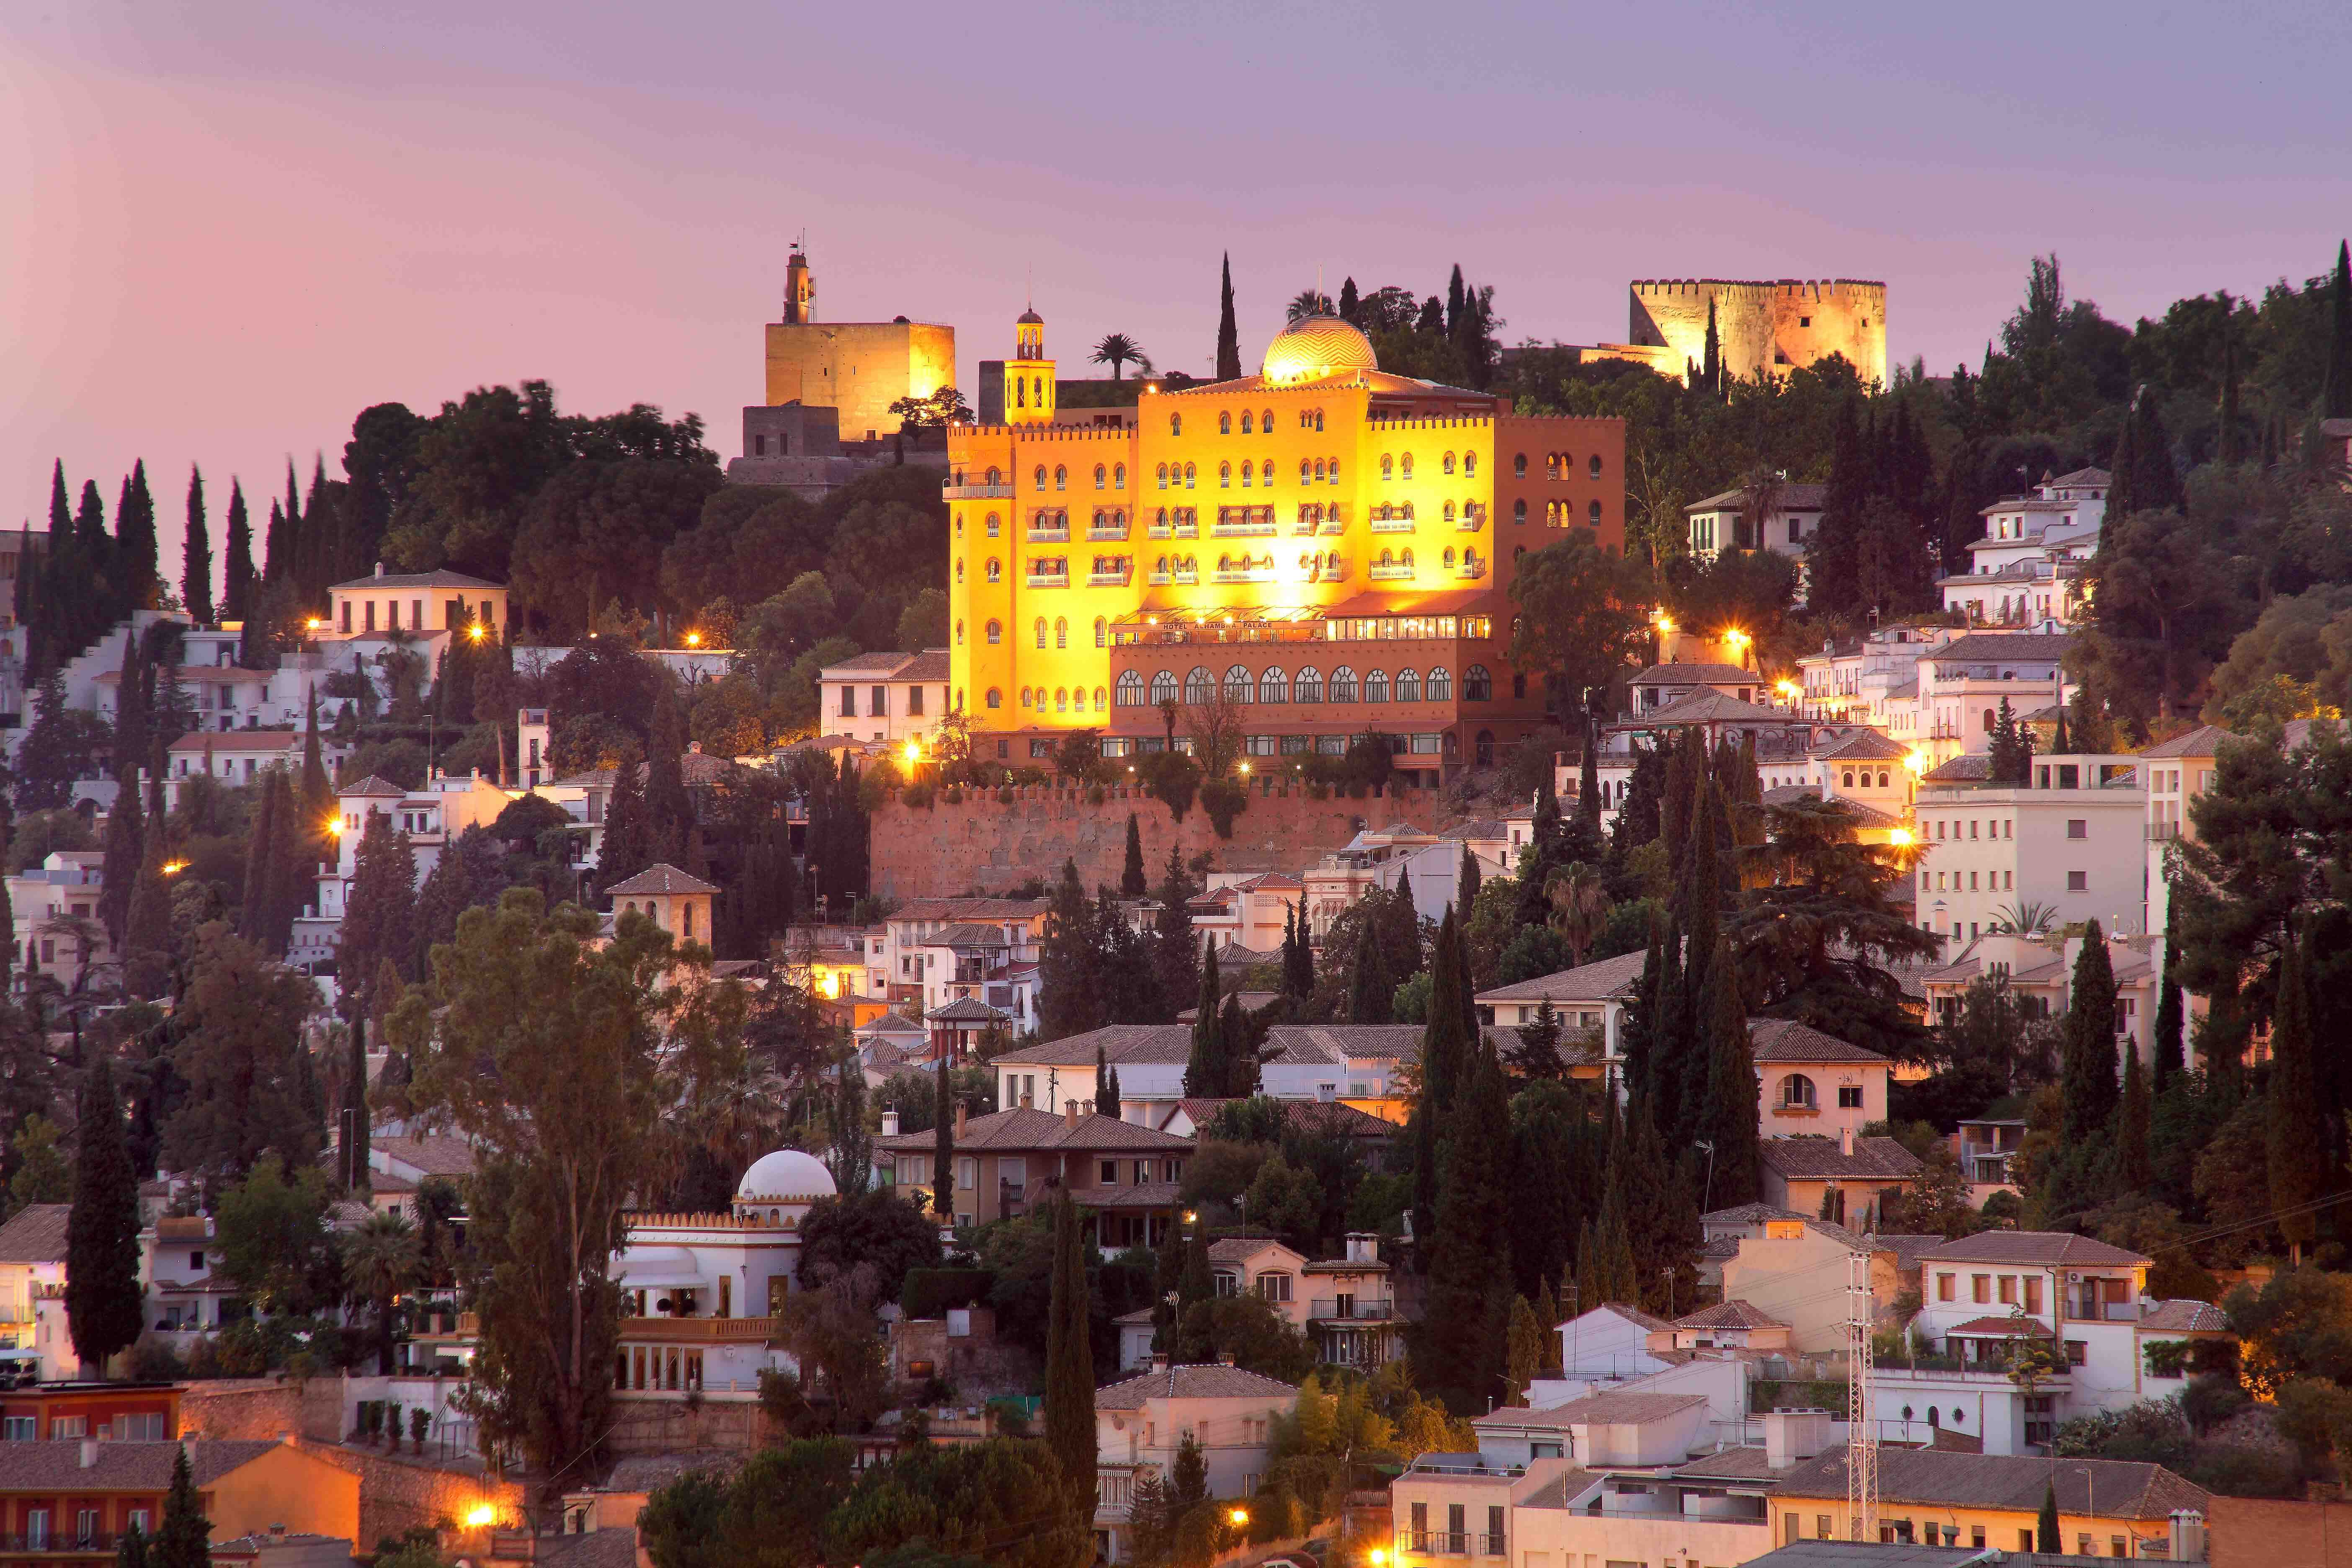 a far away photo of the hotel alhambra lit up at night